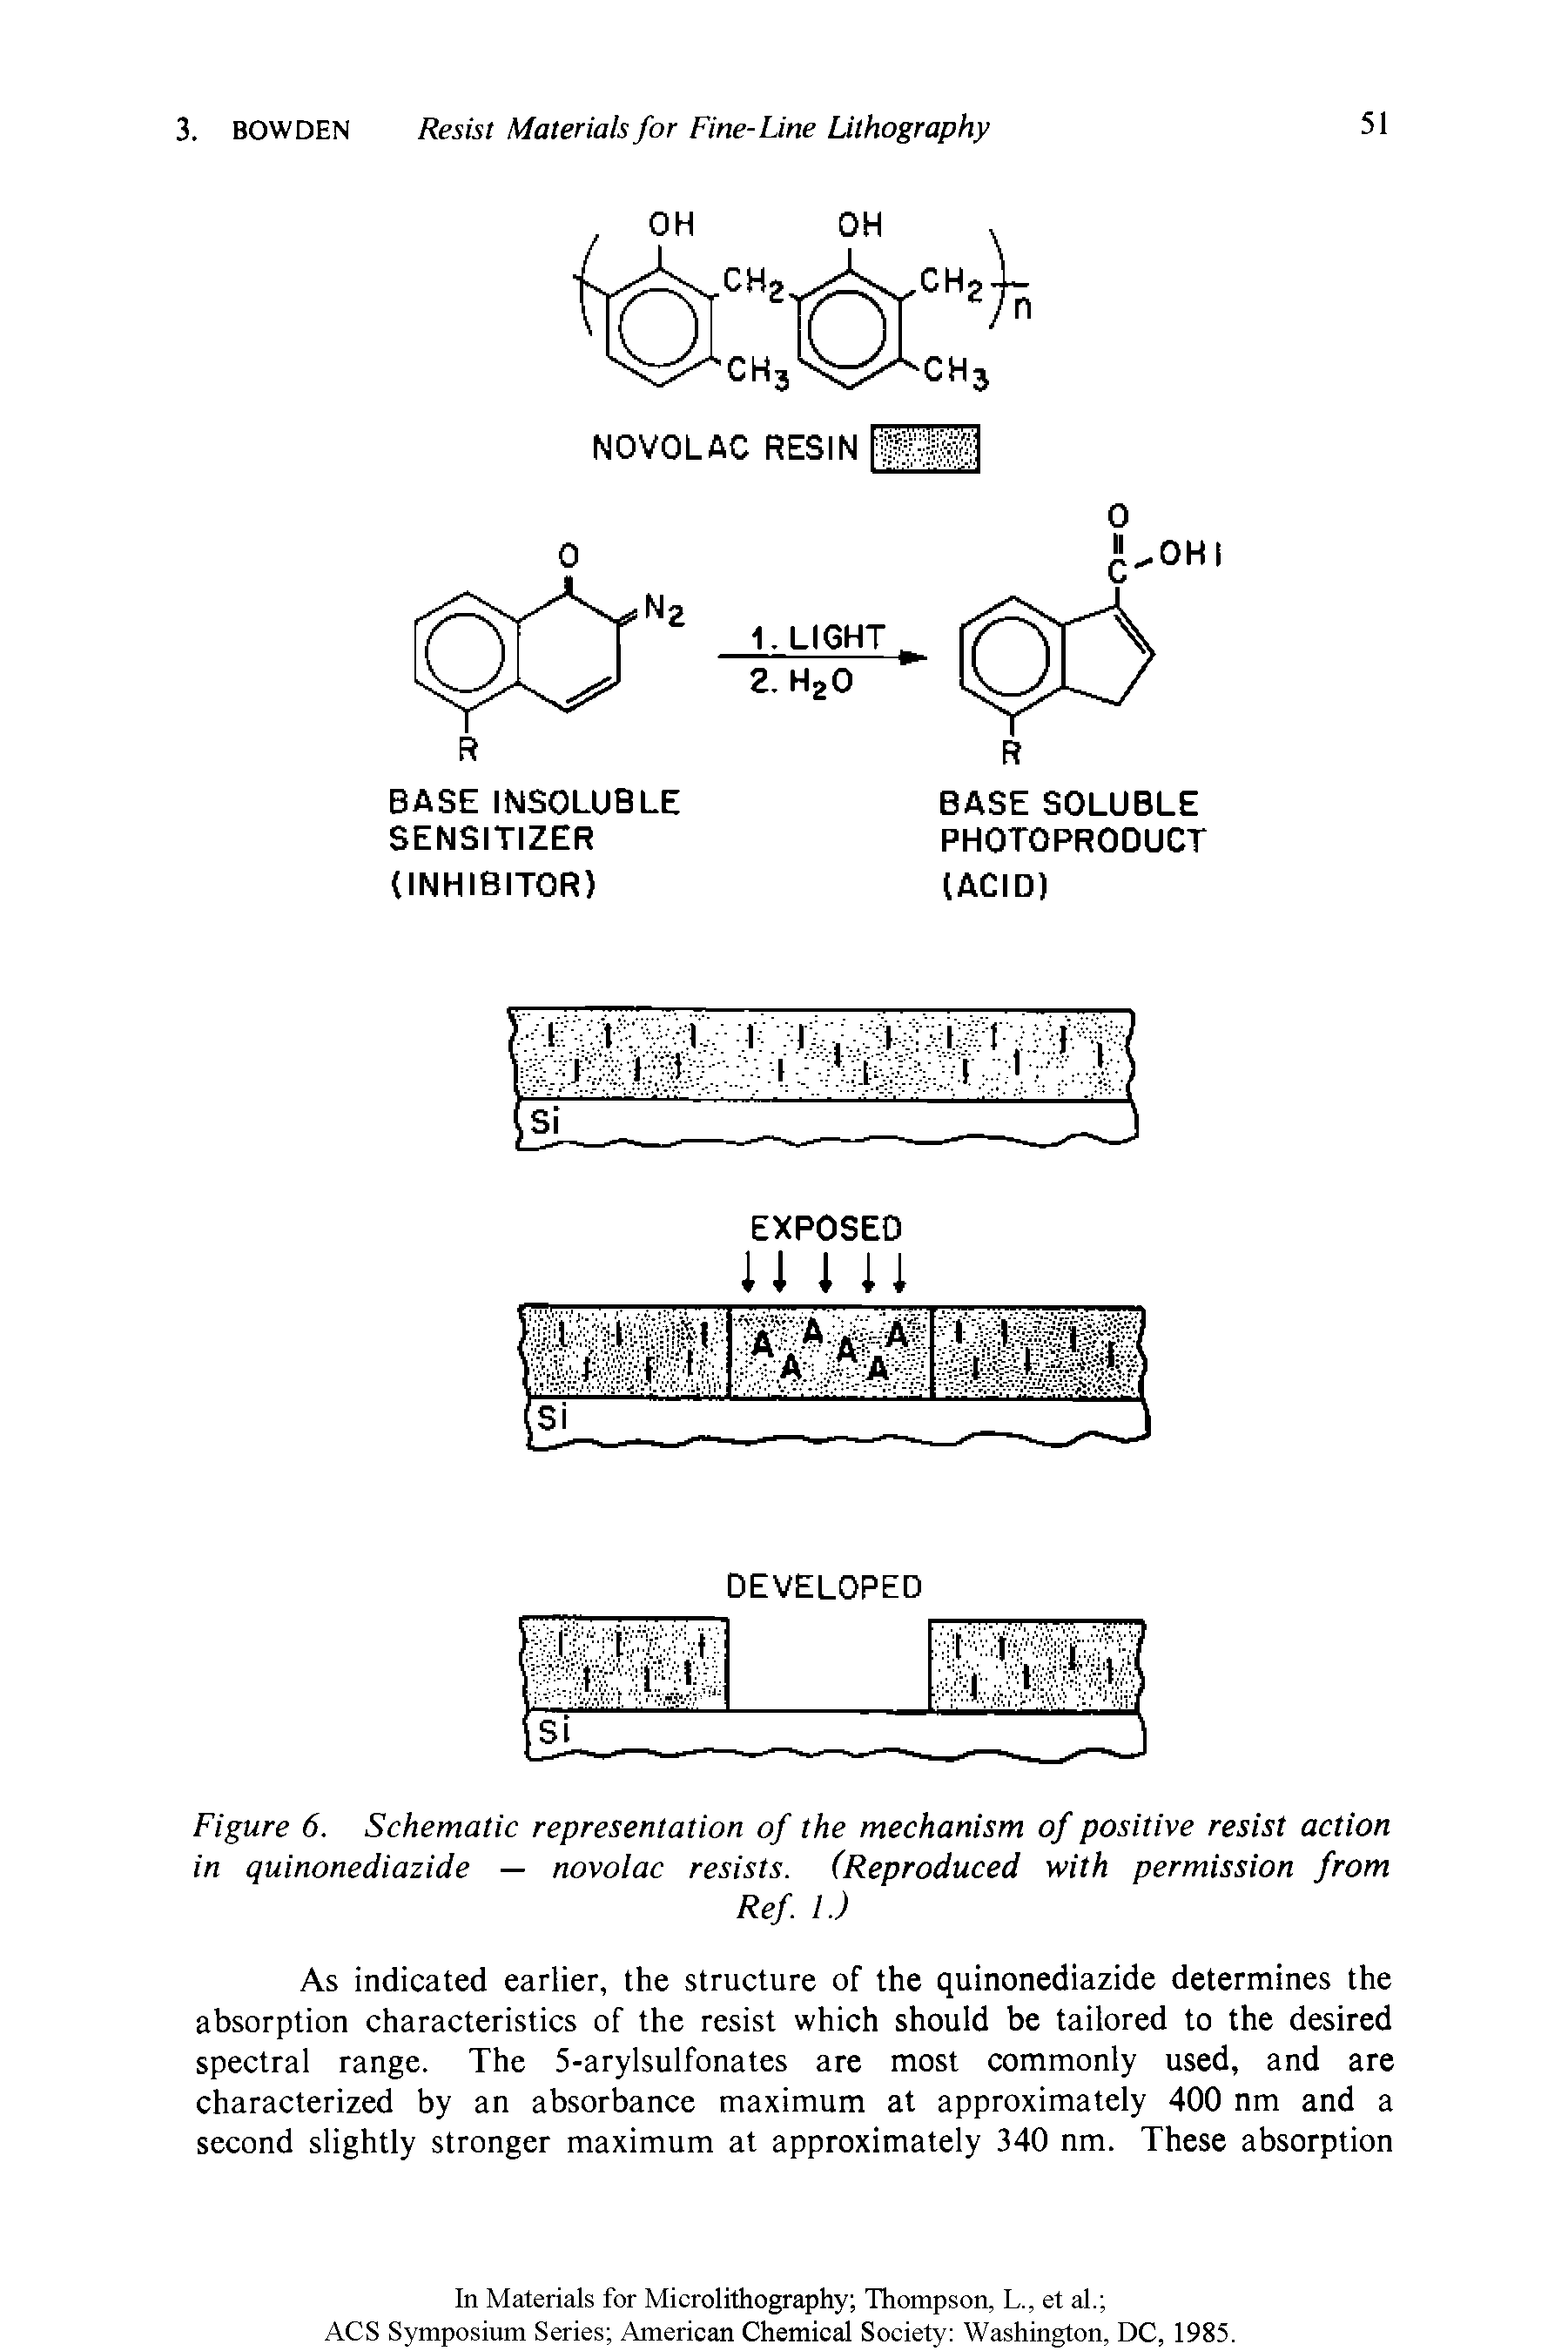 Figure 6. Schematic representation of the mechanism of positive resist action in quinonediazide — novolac resists. (Reproduced with permission from...